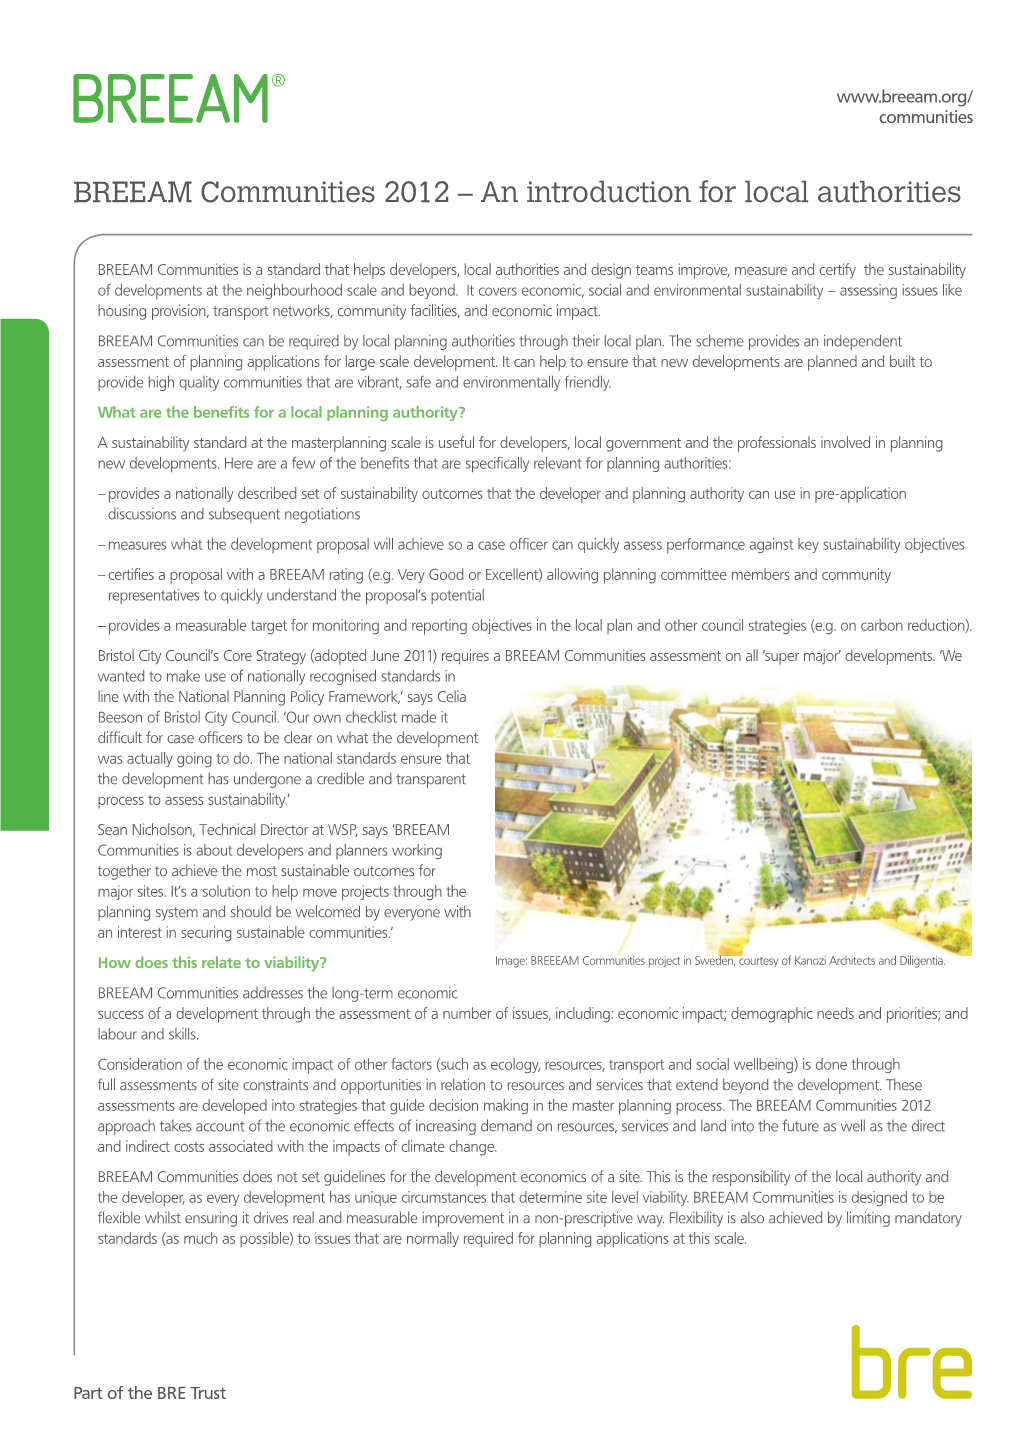 BREEAM Communities 2012 – an Introduction for Local Authorities